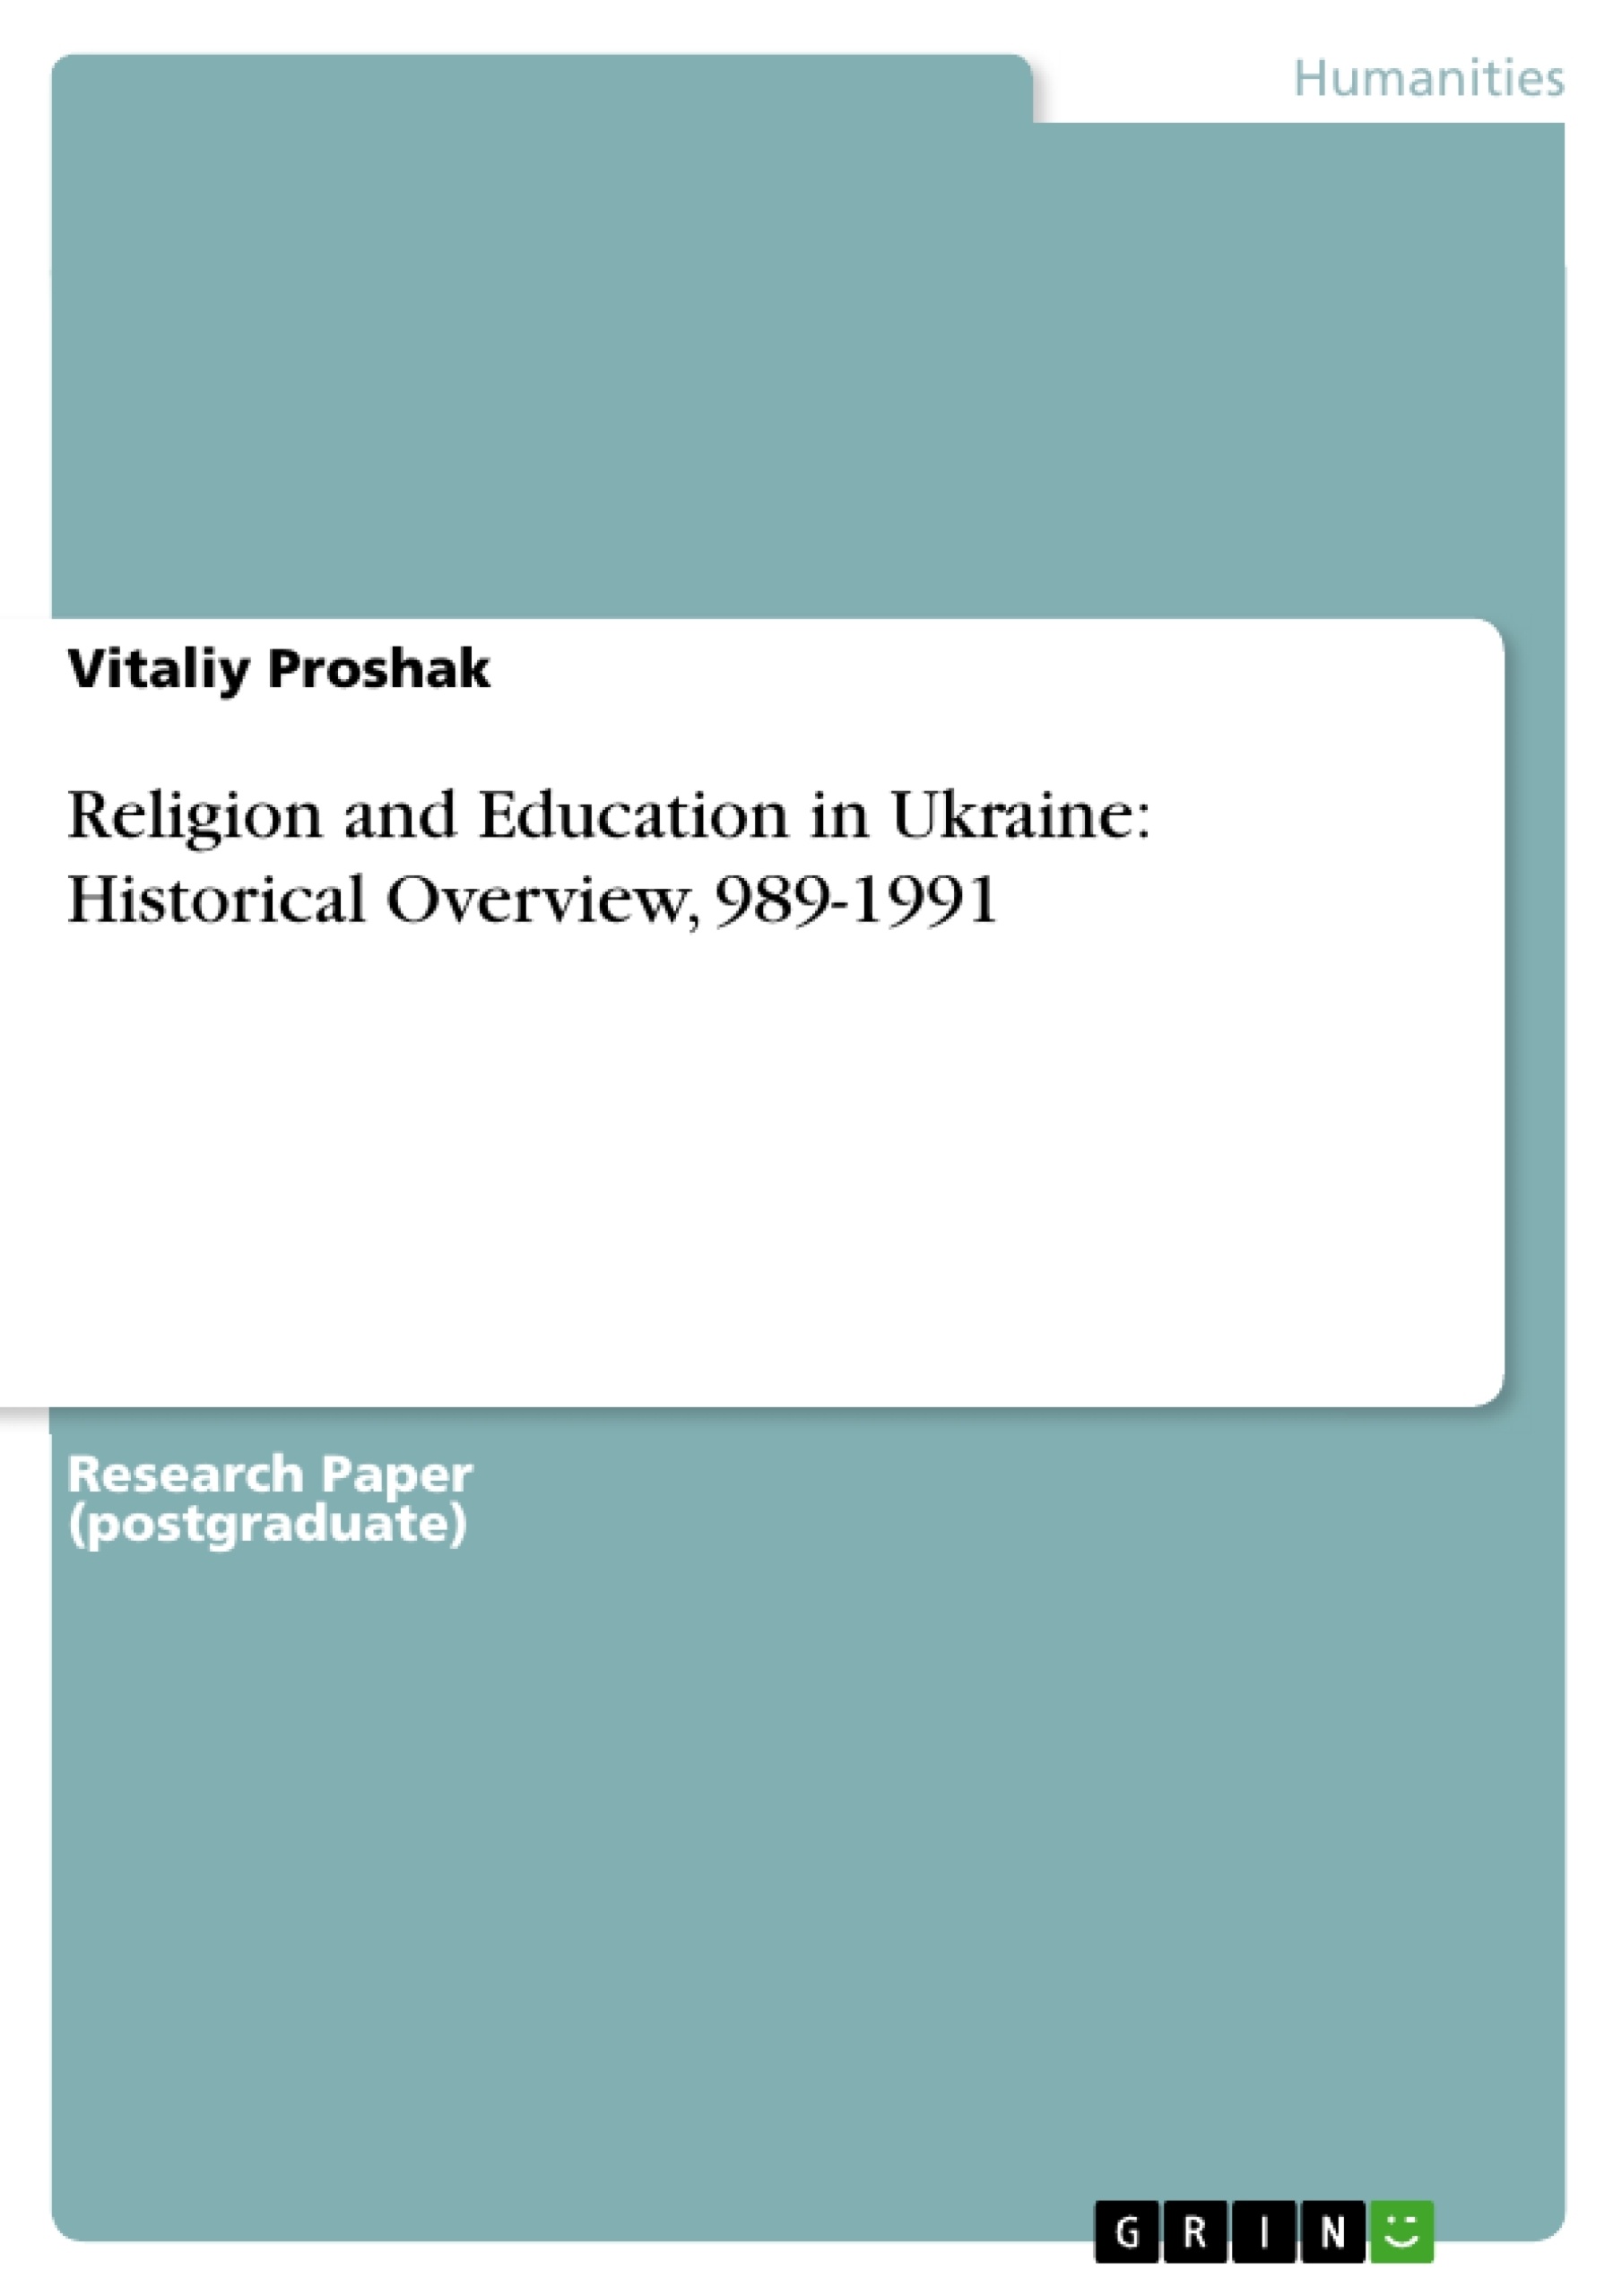 Título: Religion and Education in Ukraine: Historical Overview, 989-1991